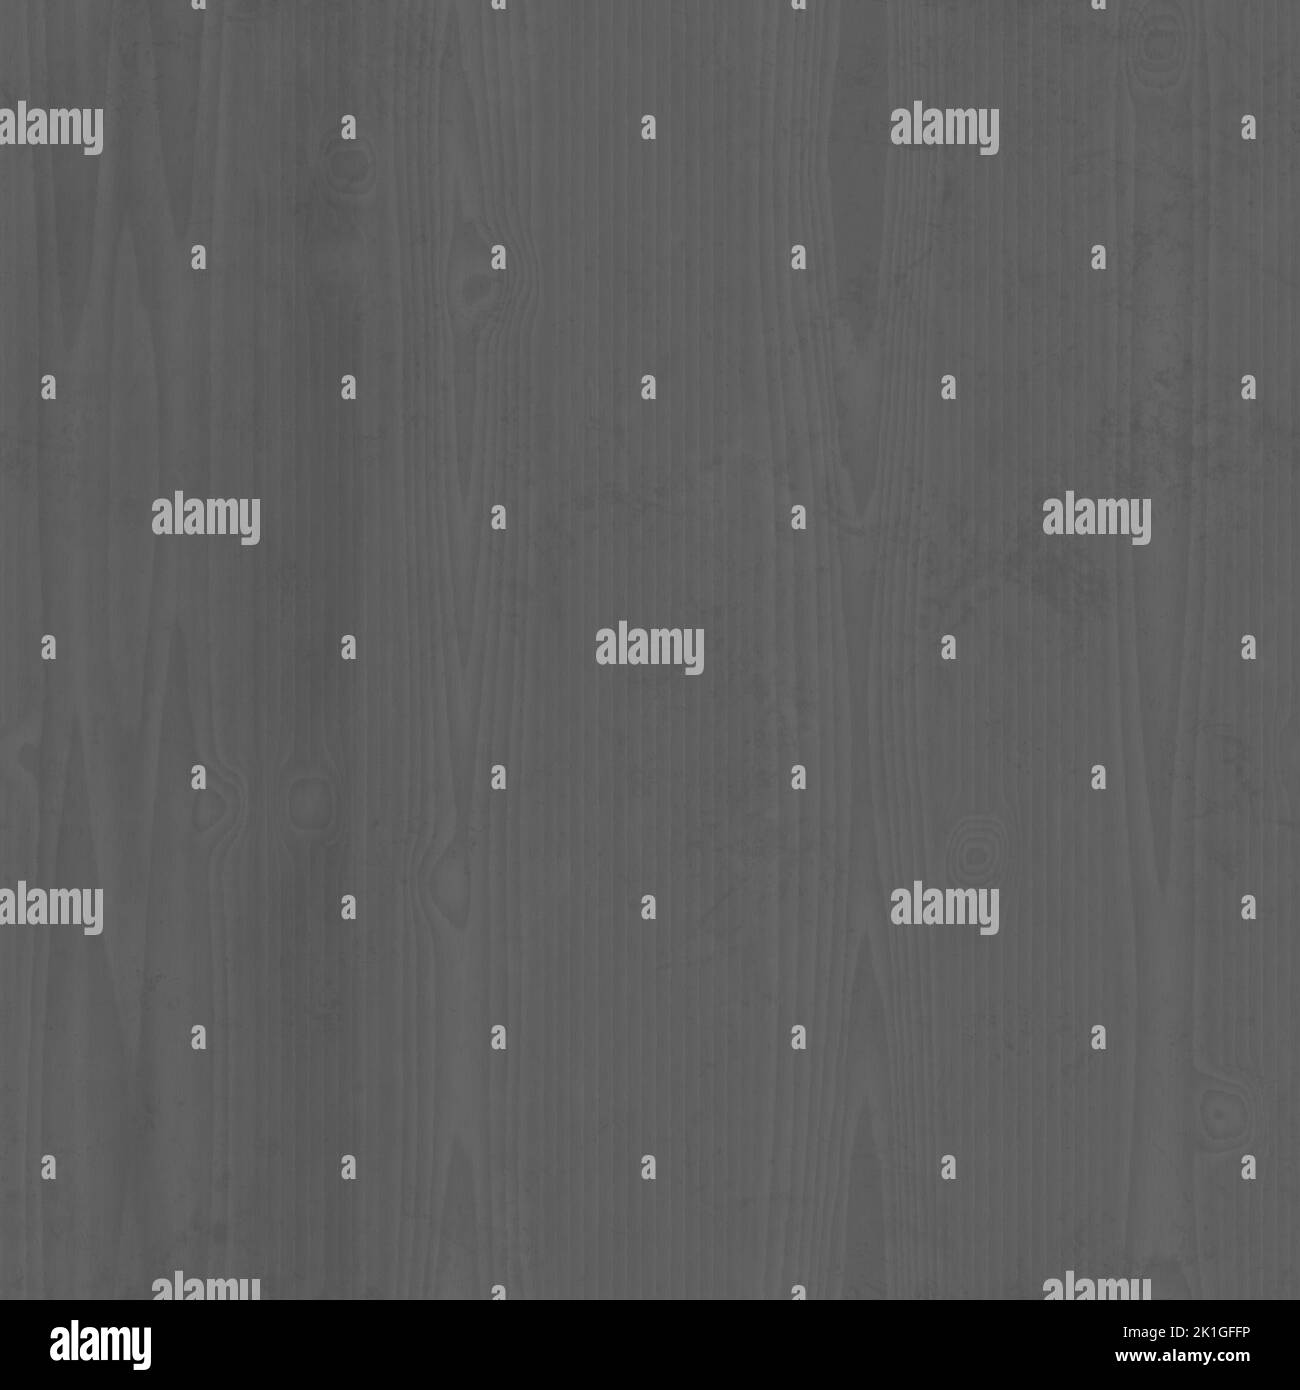 Bump map water stains texture. High resolution Stock Photo